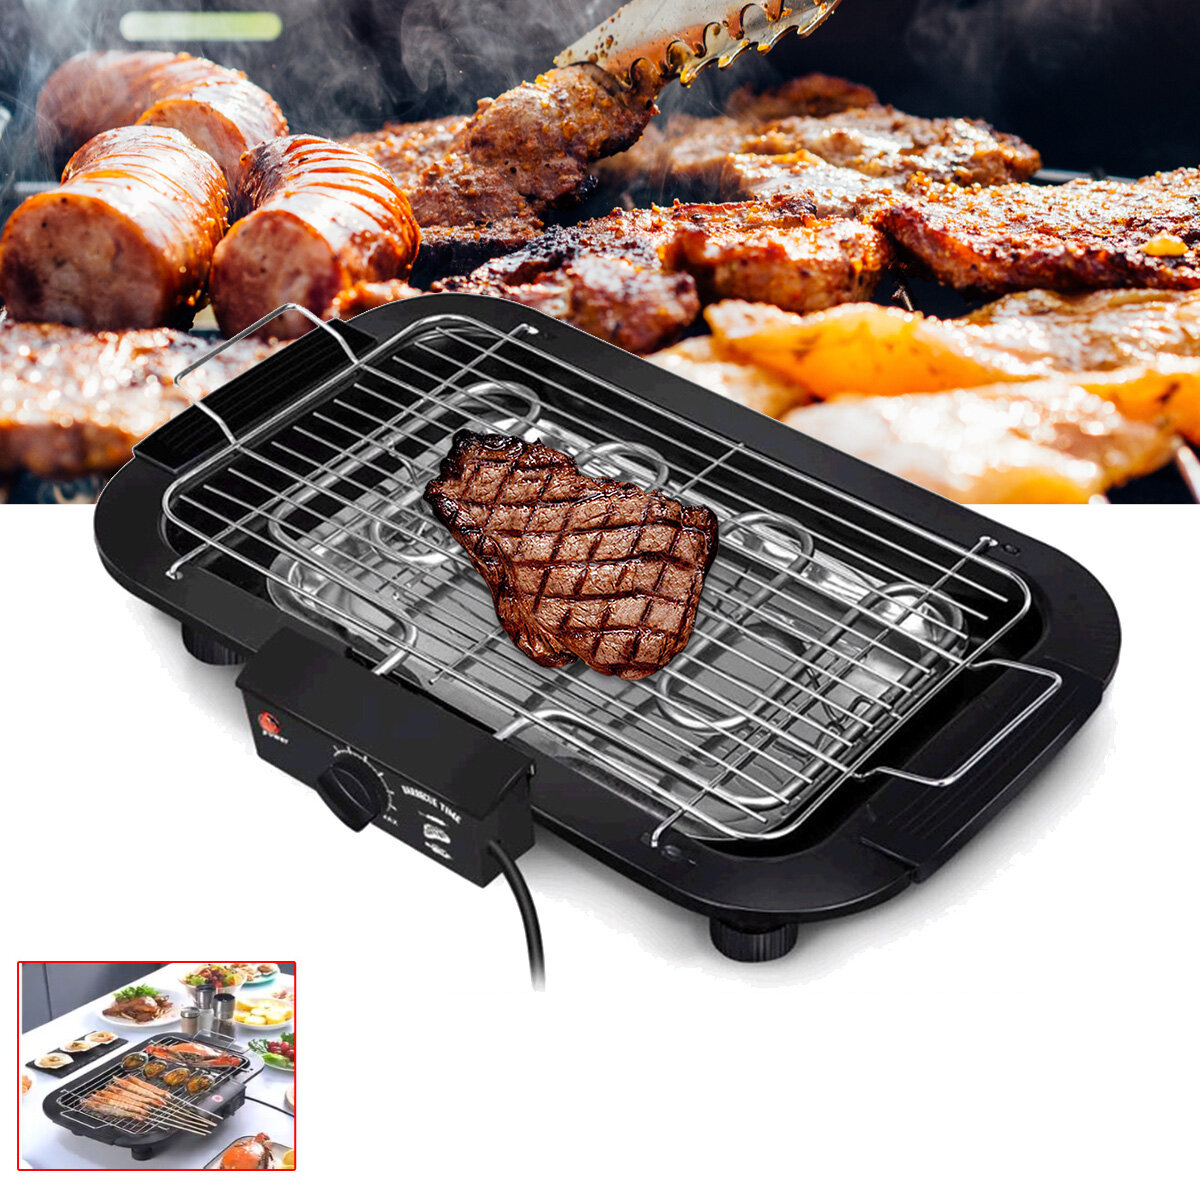 best price,220v,portable,electric,grill,pan,eu,discount